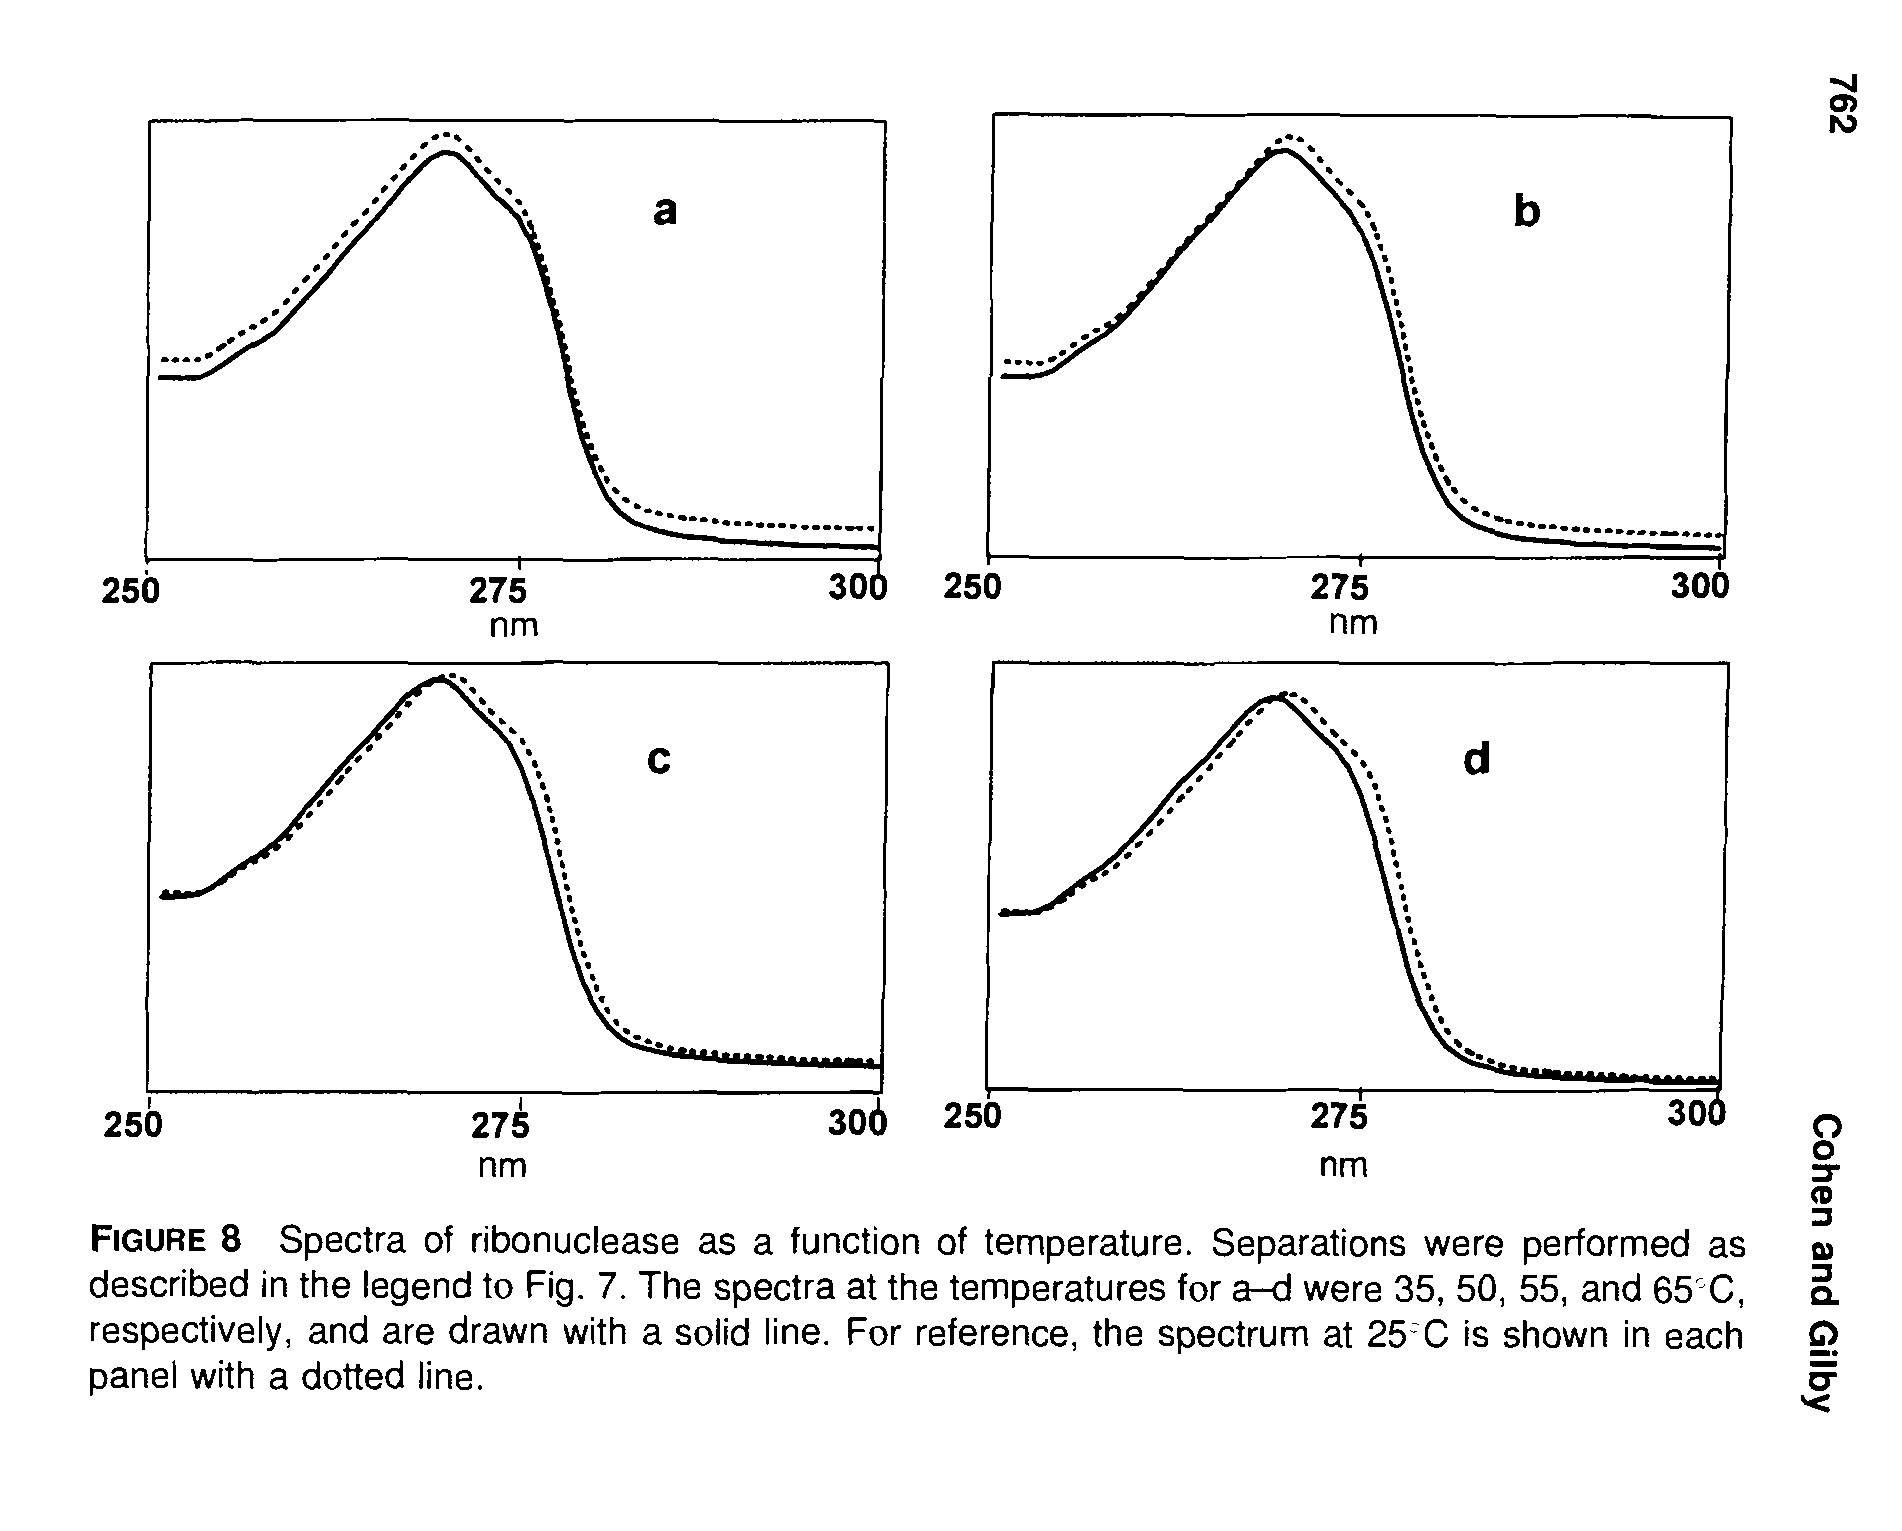 Figure 8 Spectra of ribonuclease as a function of temperature. Separations were performed as described in the legend to Fig. 7. The spectra at the temperatures for were 35, 50, 55, and 65 C, respectively, and are drawn with a solid line. For reference, the spectrum at 25 C is shown in each panel with a dotted line.